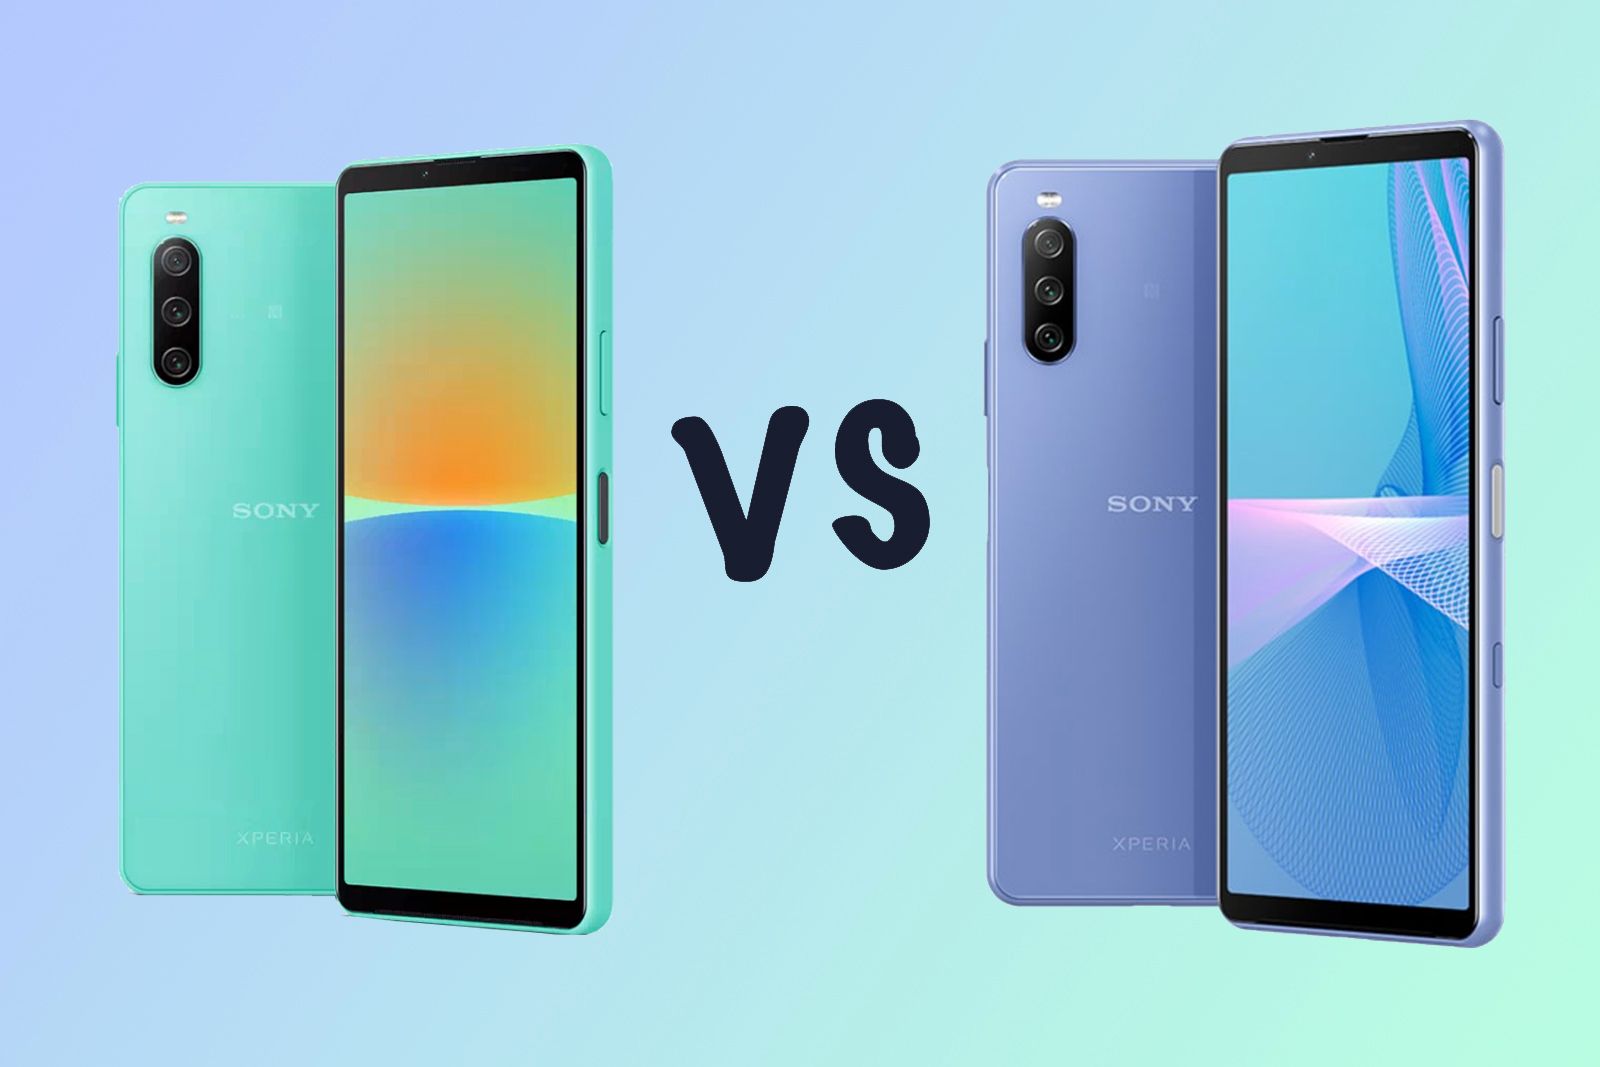 Sony Xperia 10 IV vs Xperia 10 III: What's the difference? photo 1